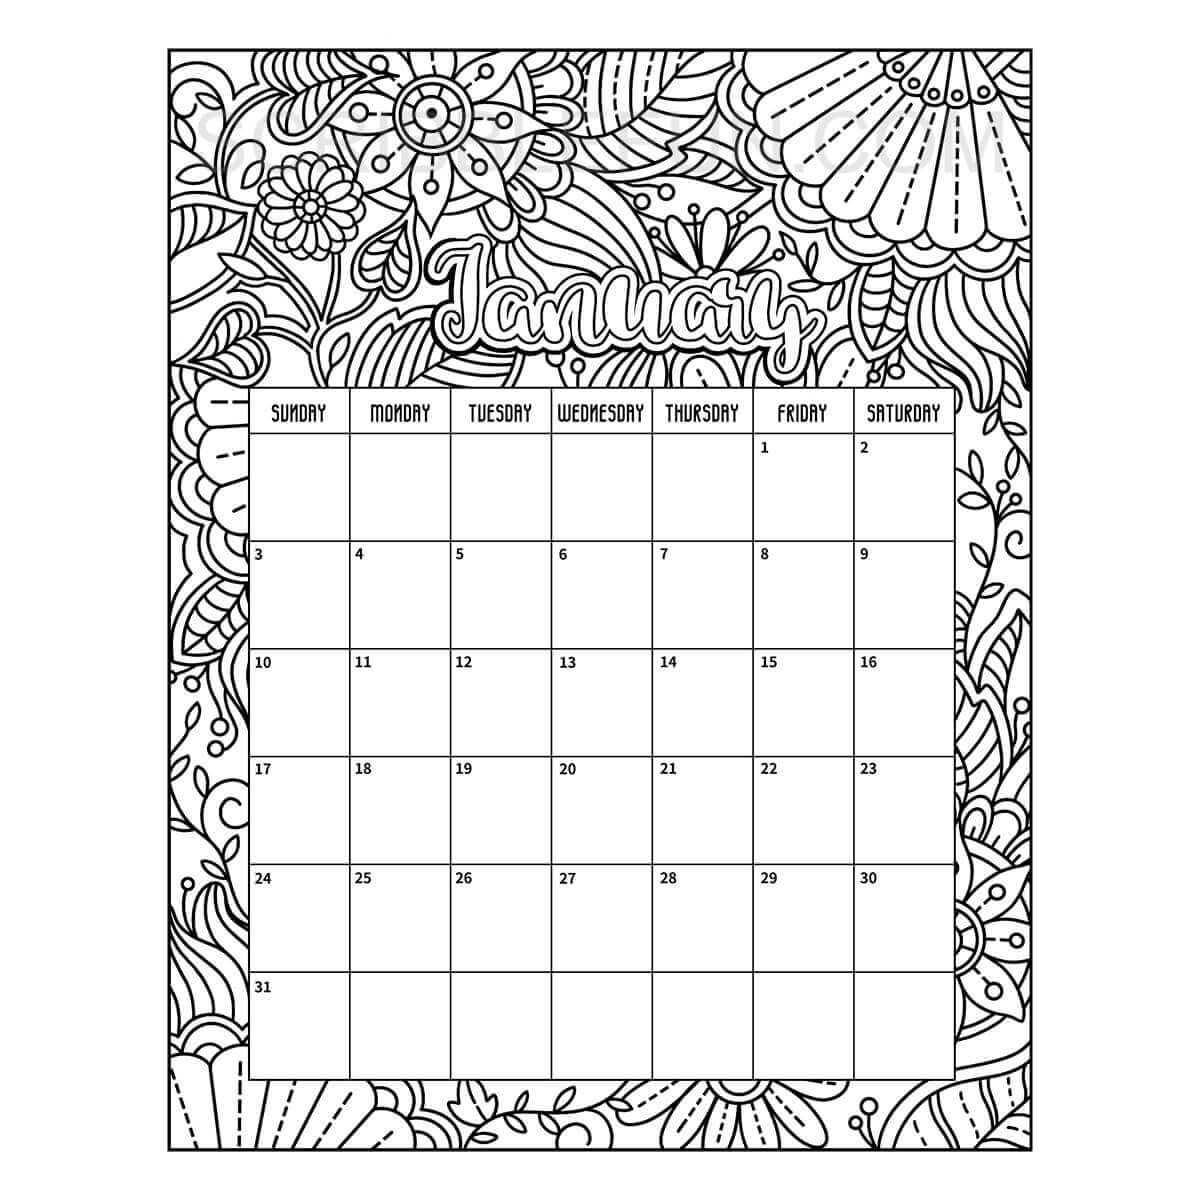 January 2021 calendar coloring page